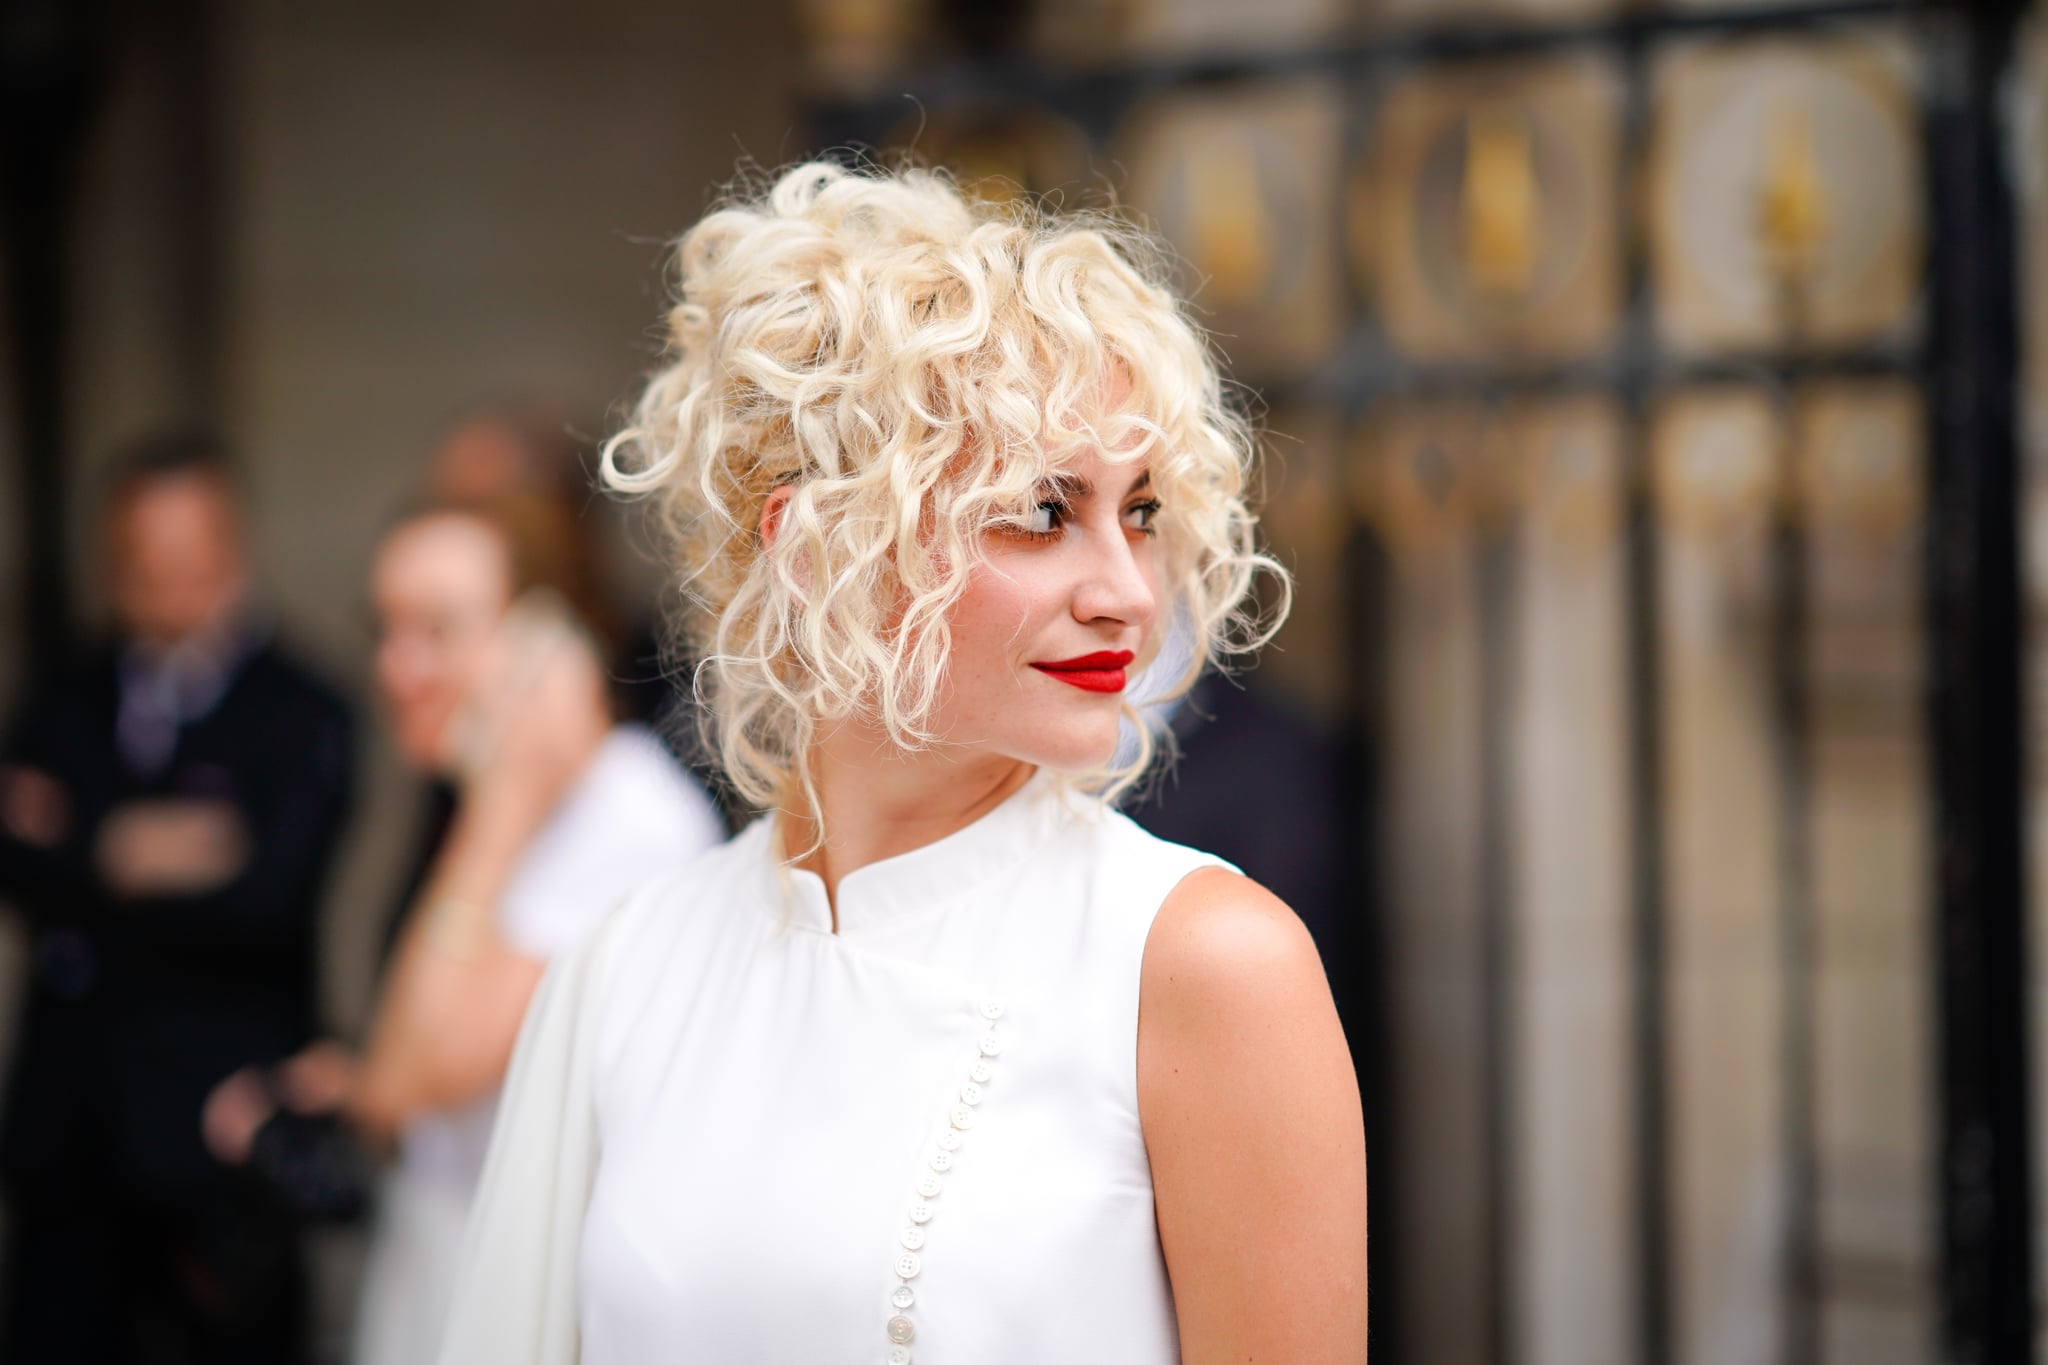 4. "The Pros and Cons of Getting an Ash Blonde Perm" - wide 4